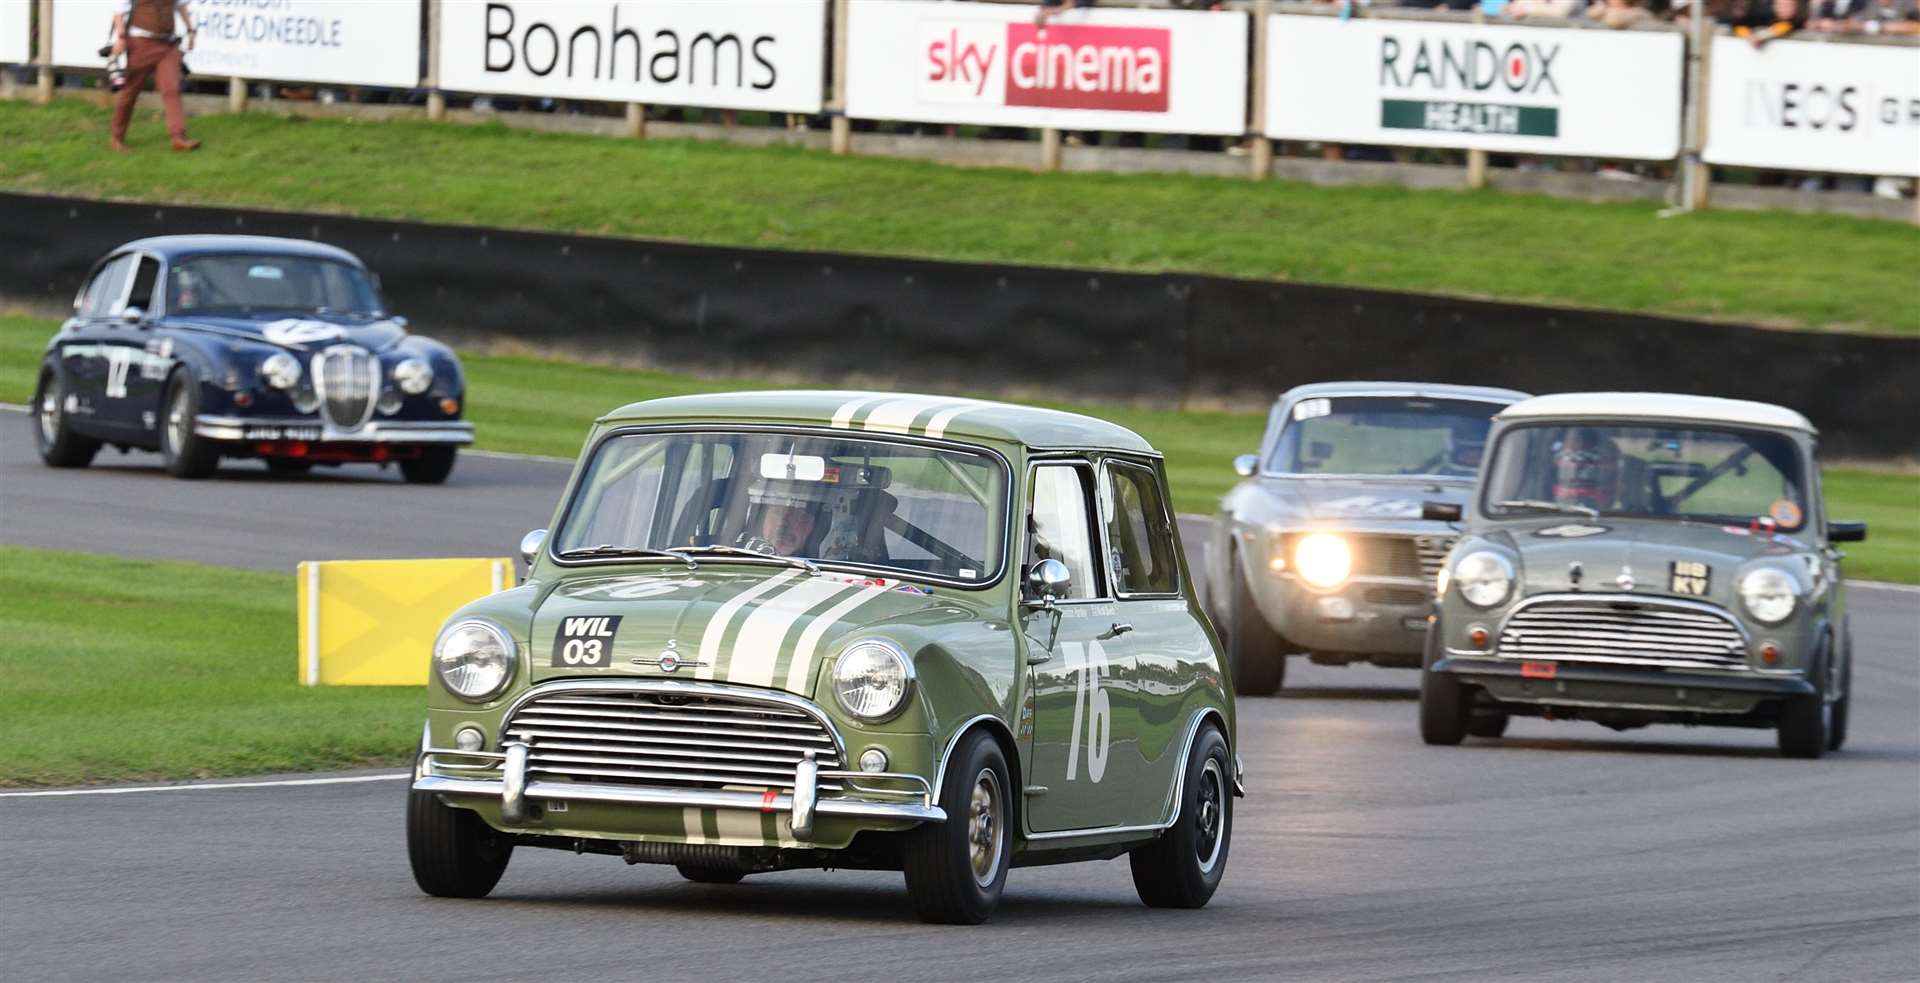 Nick Swift (76), from Tenterden, leads Bill Sollis (80), from Tonbridge, in the second St Mary's Trophy race. Picture: Simon Hildrew